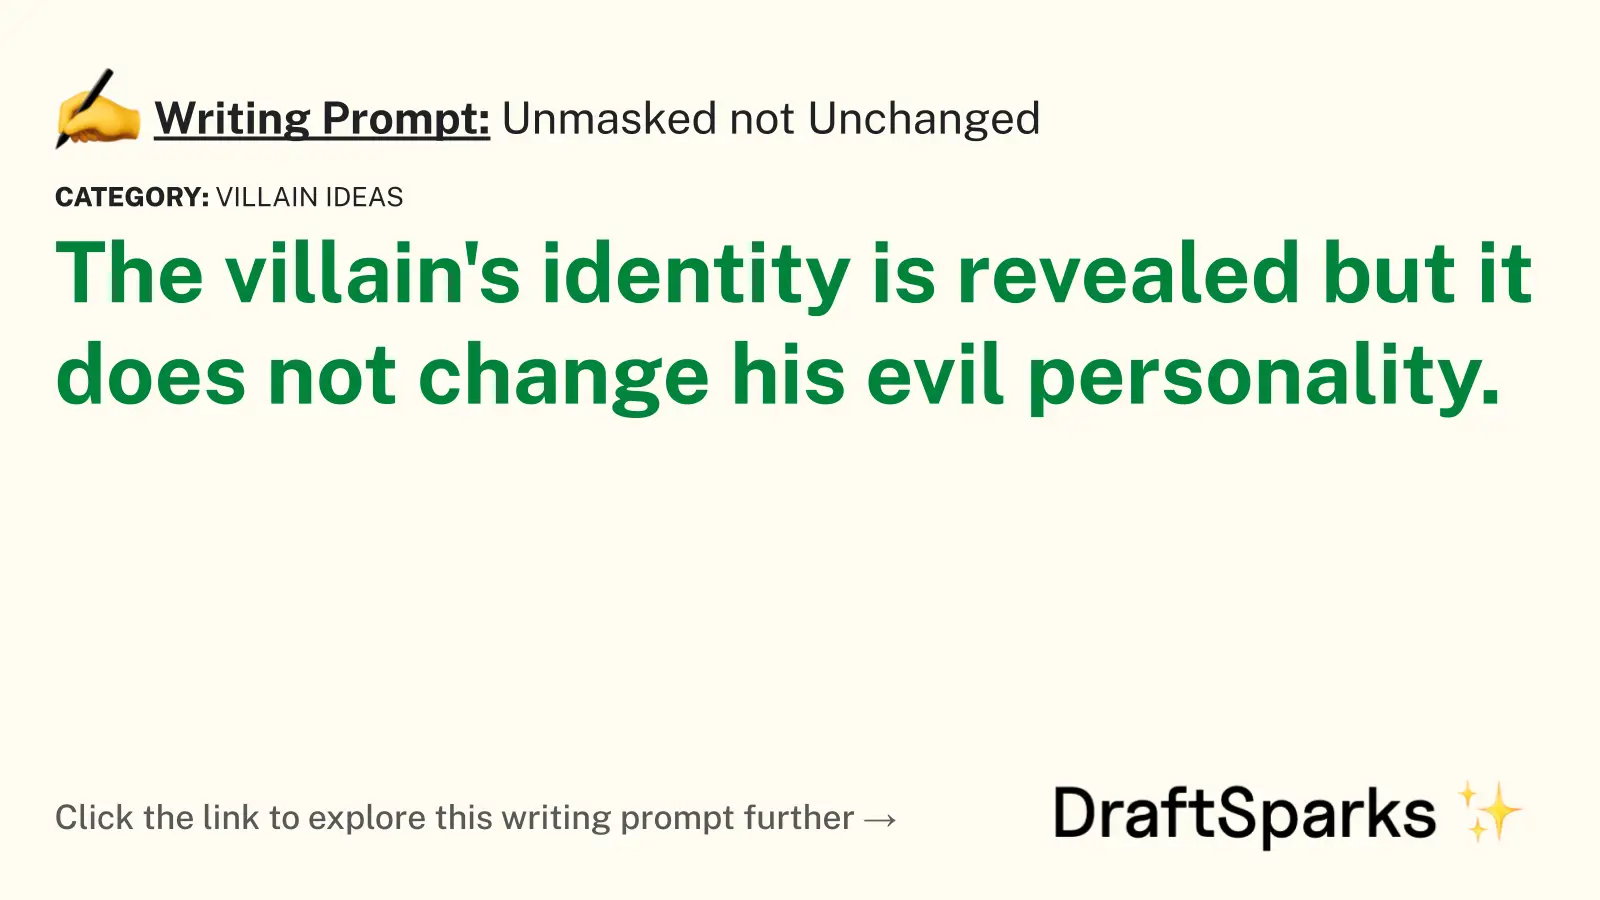 Unmasked not Unchanged